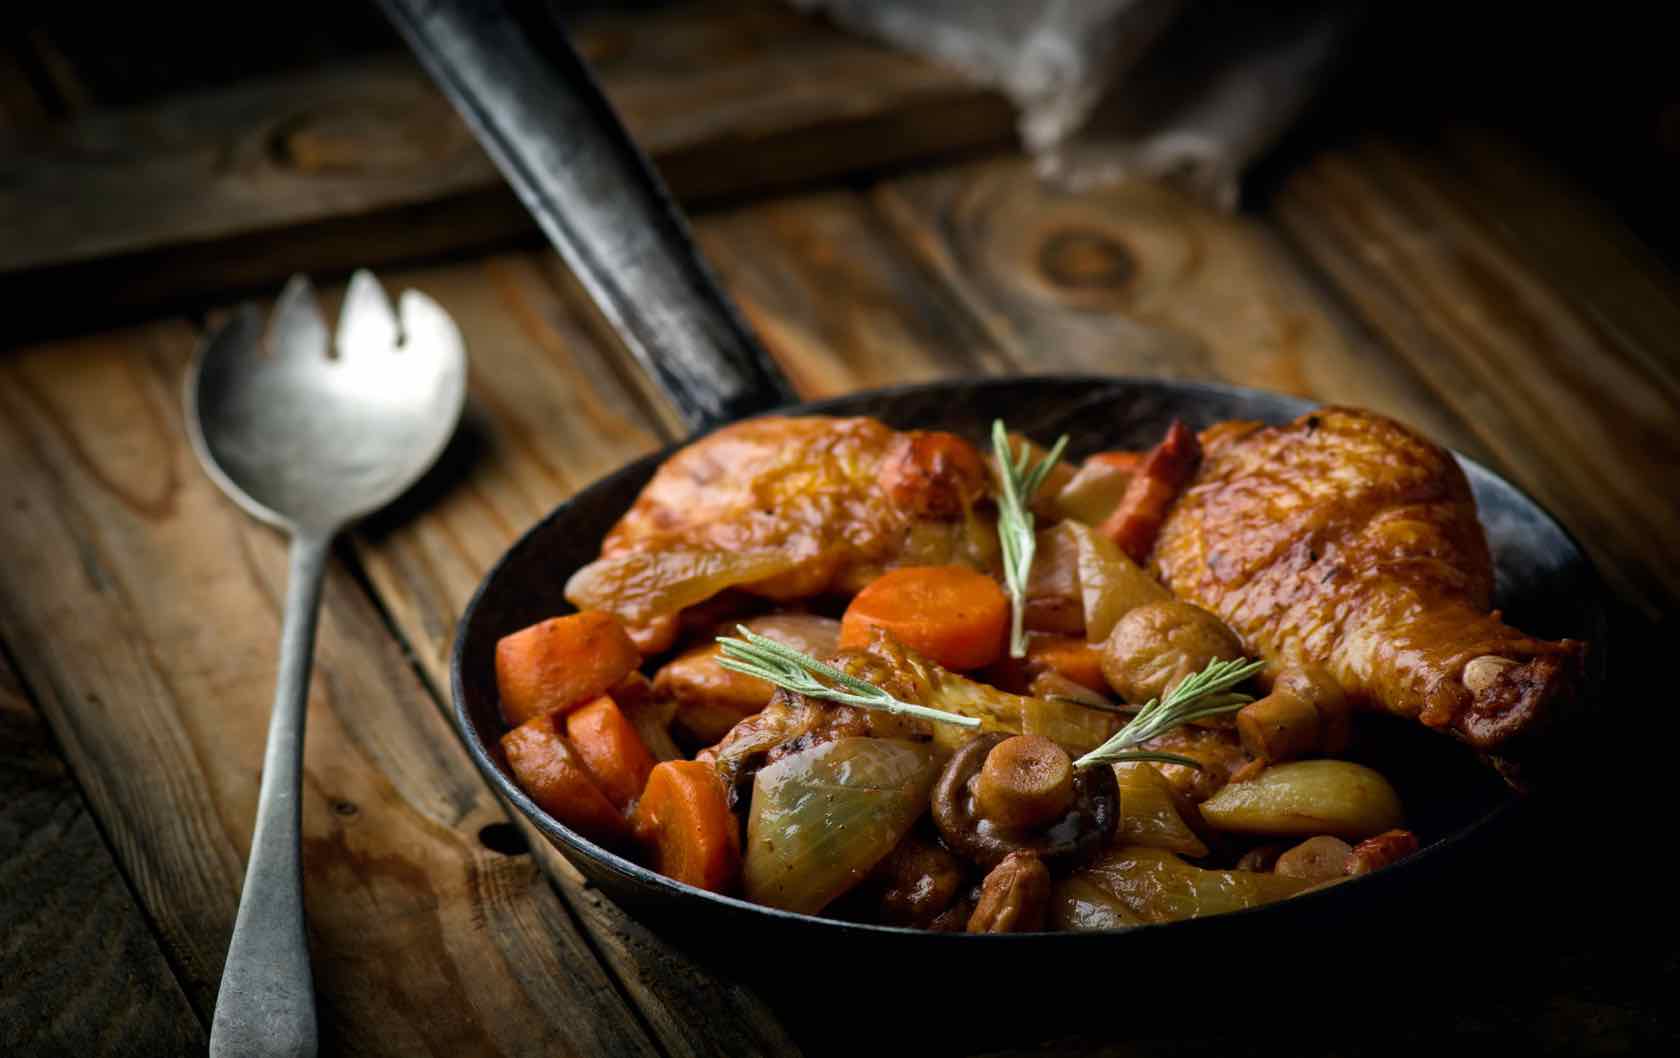 Classic Savory French Dishes Coq au Vin